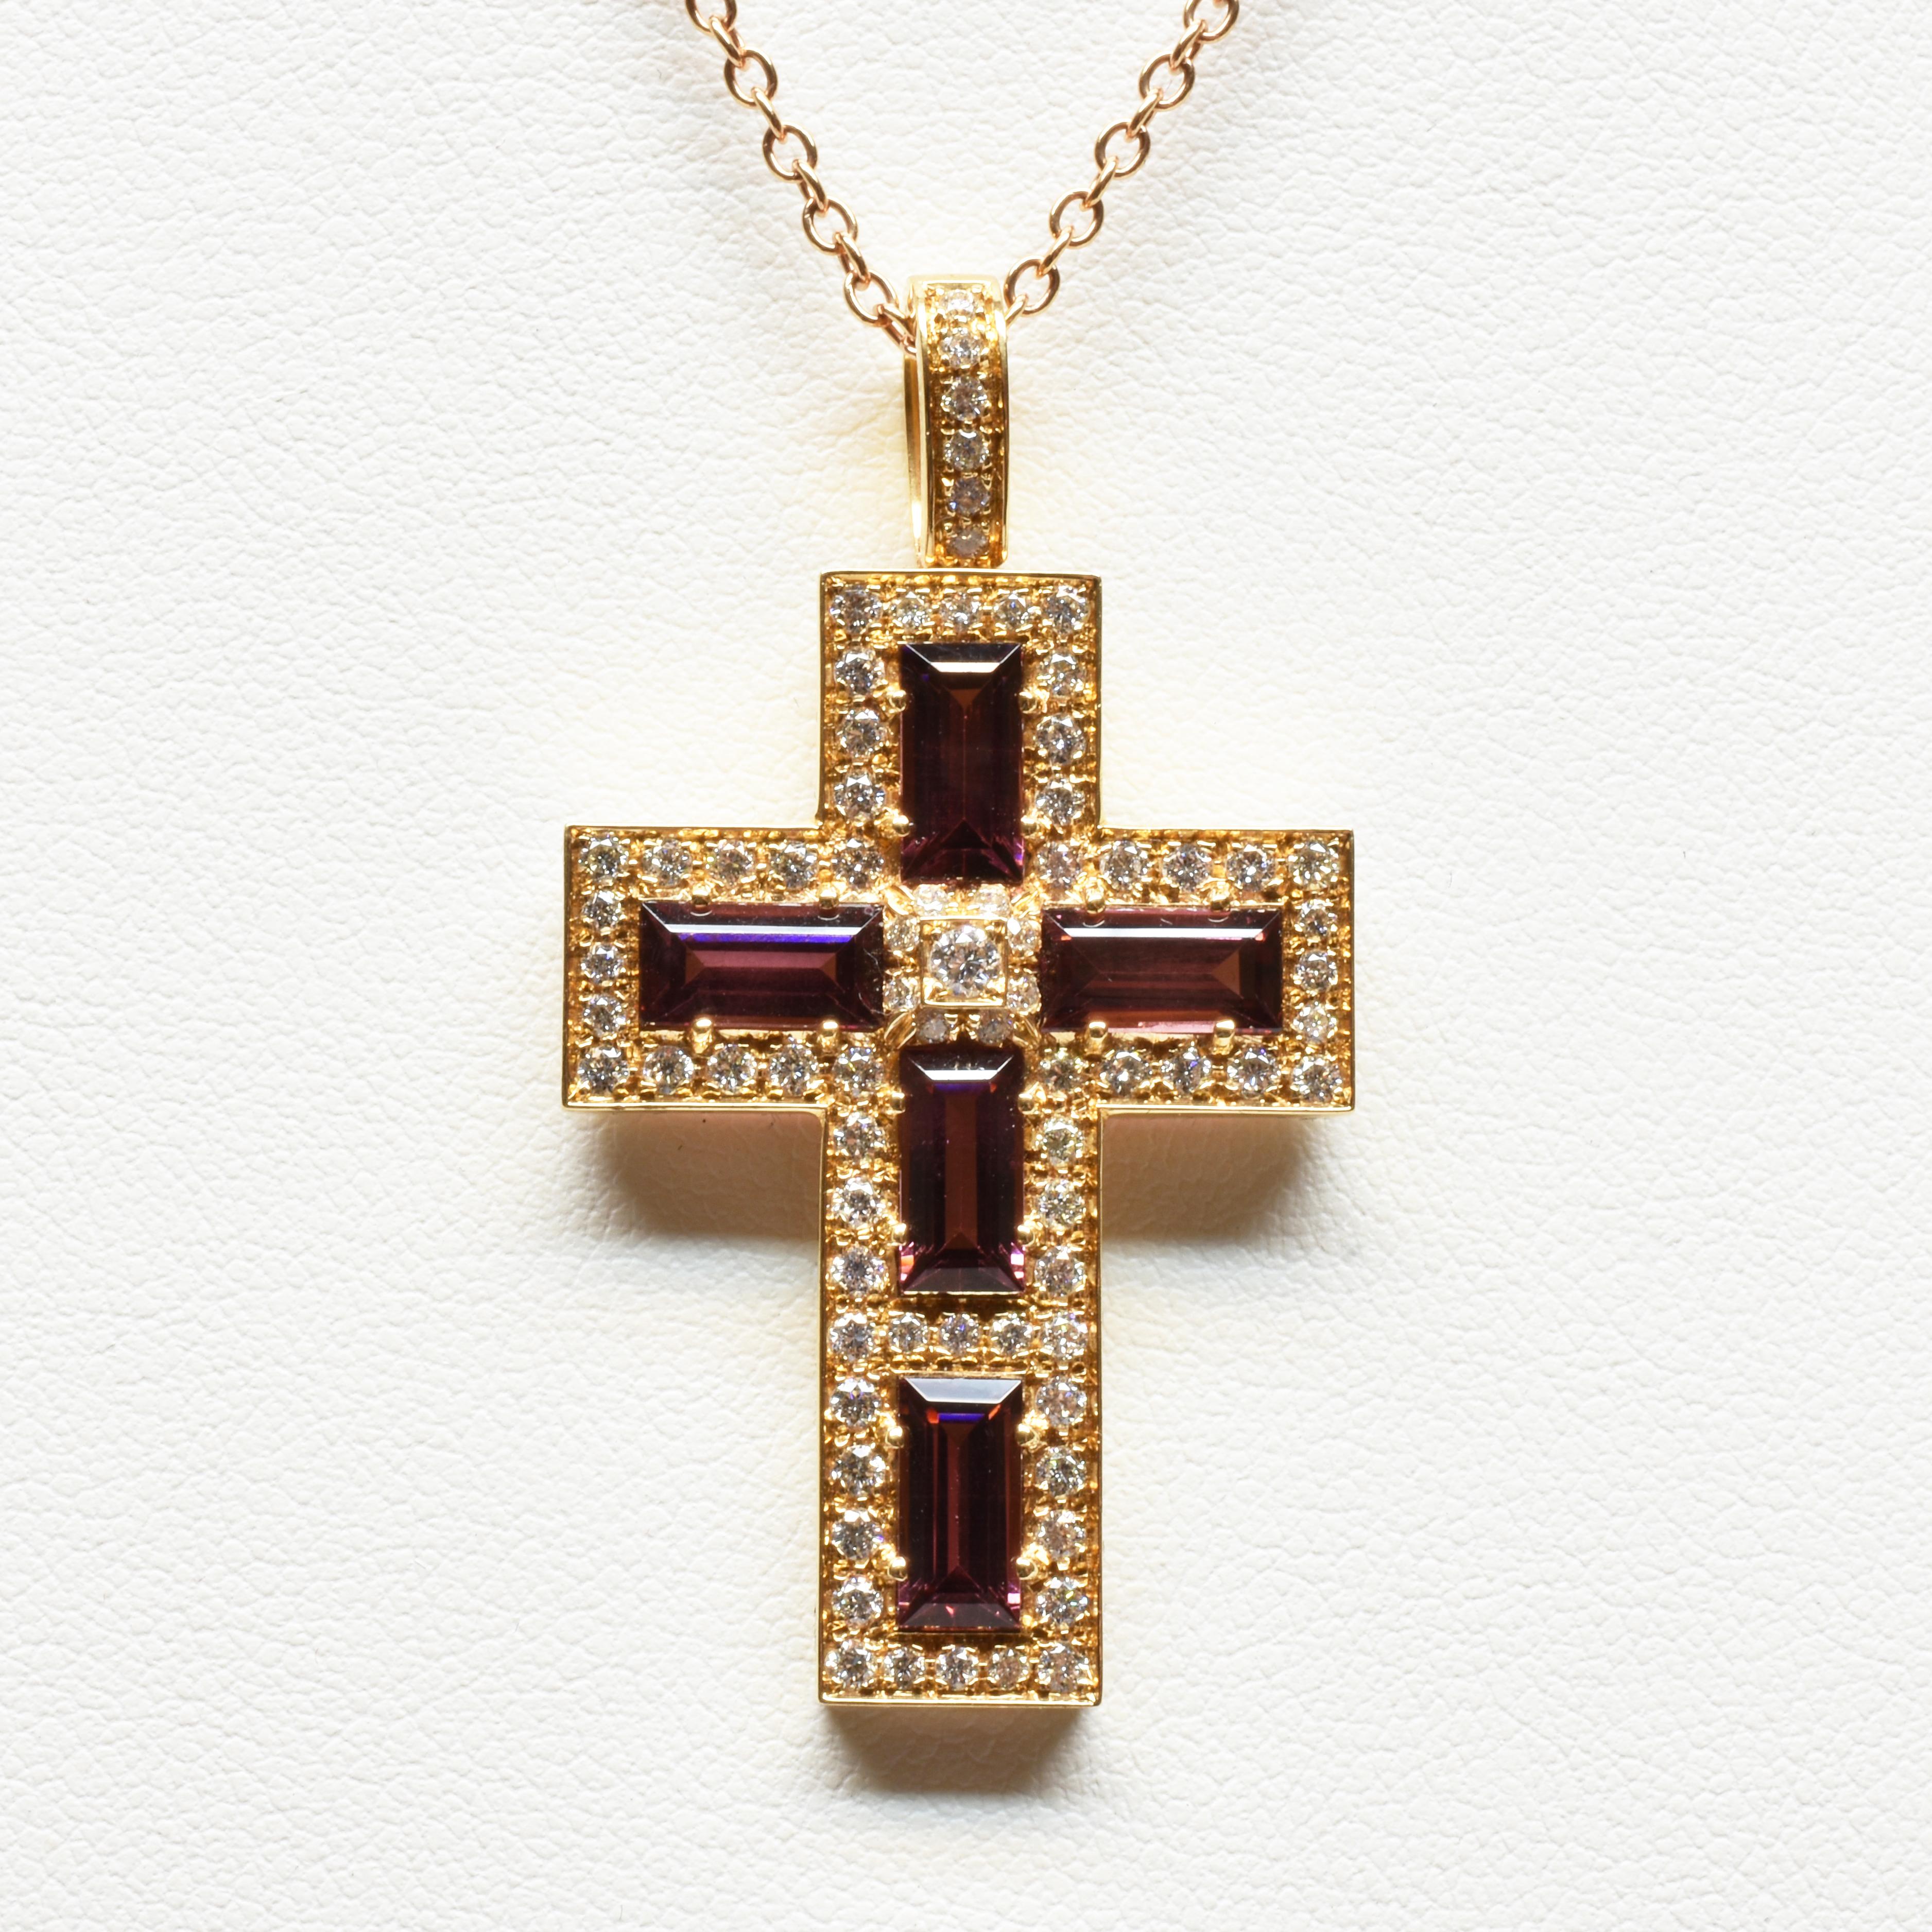 Gilberto Cassola 18Kt Rose Gold Cross Pendant with Rubellite Tourmaline Baguettes and White Diamonds.
Handmade in our Atelier in Valenza Italy.
This Piece comes with a 46 cm 18Kt rose Gold Chain.
A Modern and Stylish Cross for an everyday use.
G